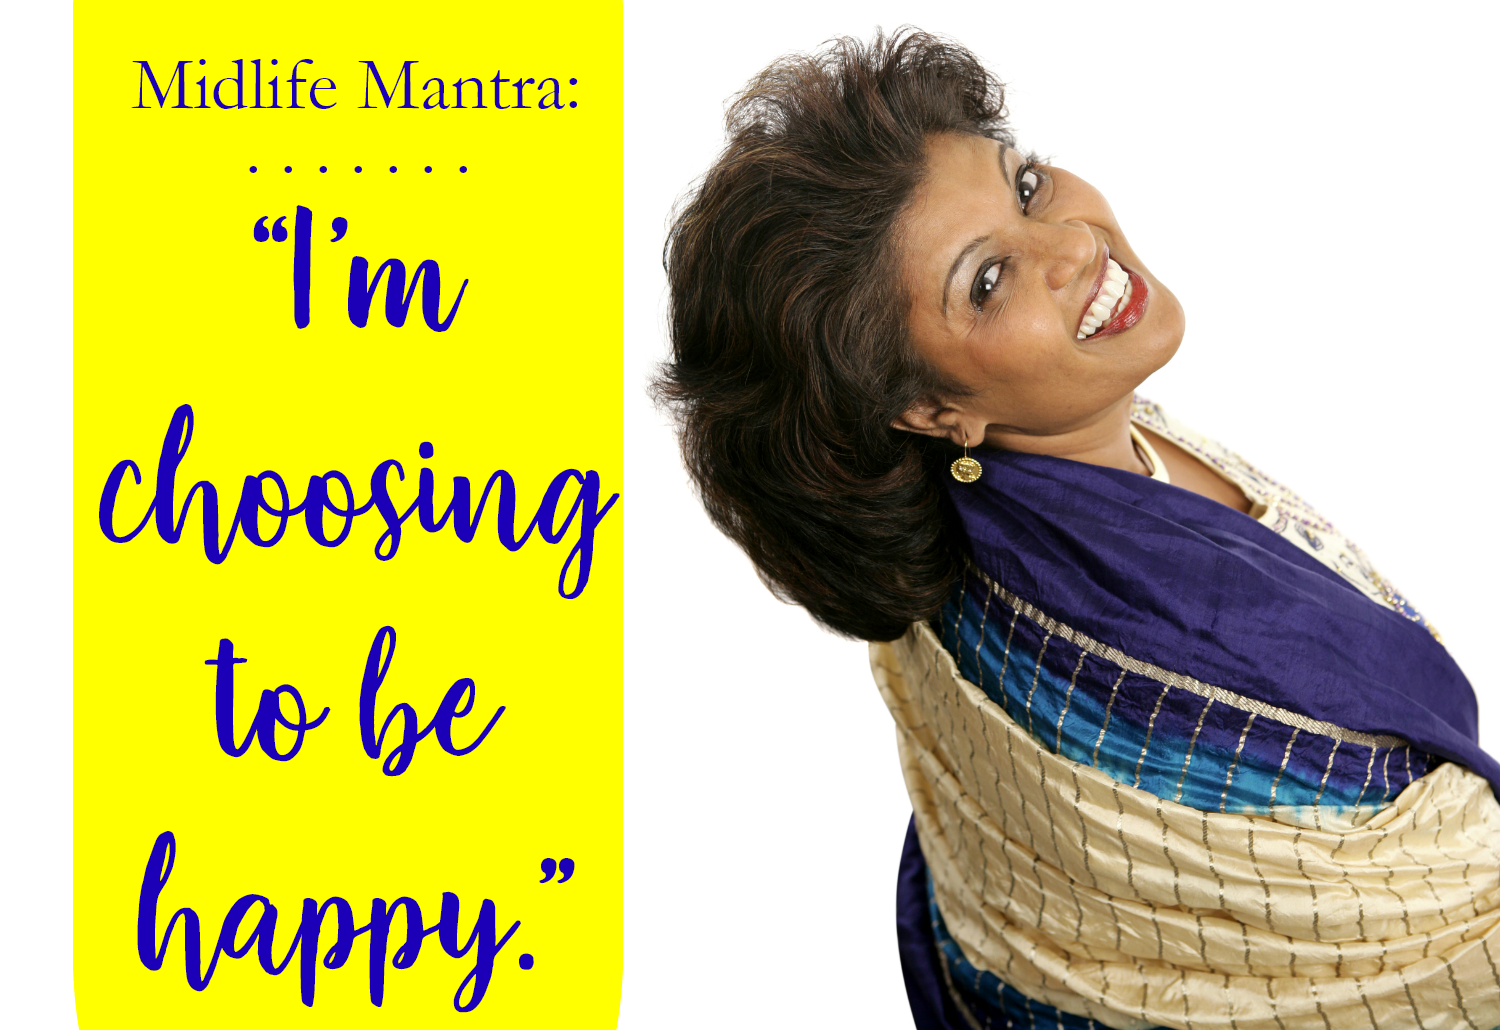 MIDLIFE MANTRA: I’m Choosing to be Happy